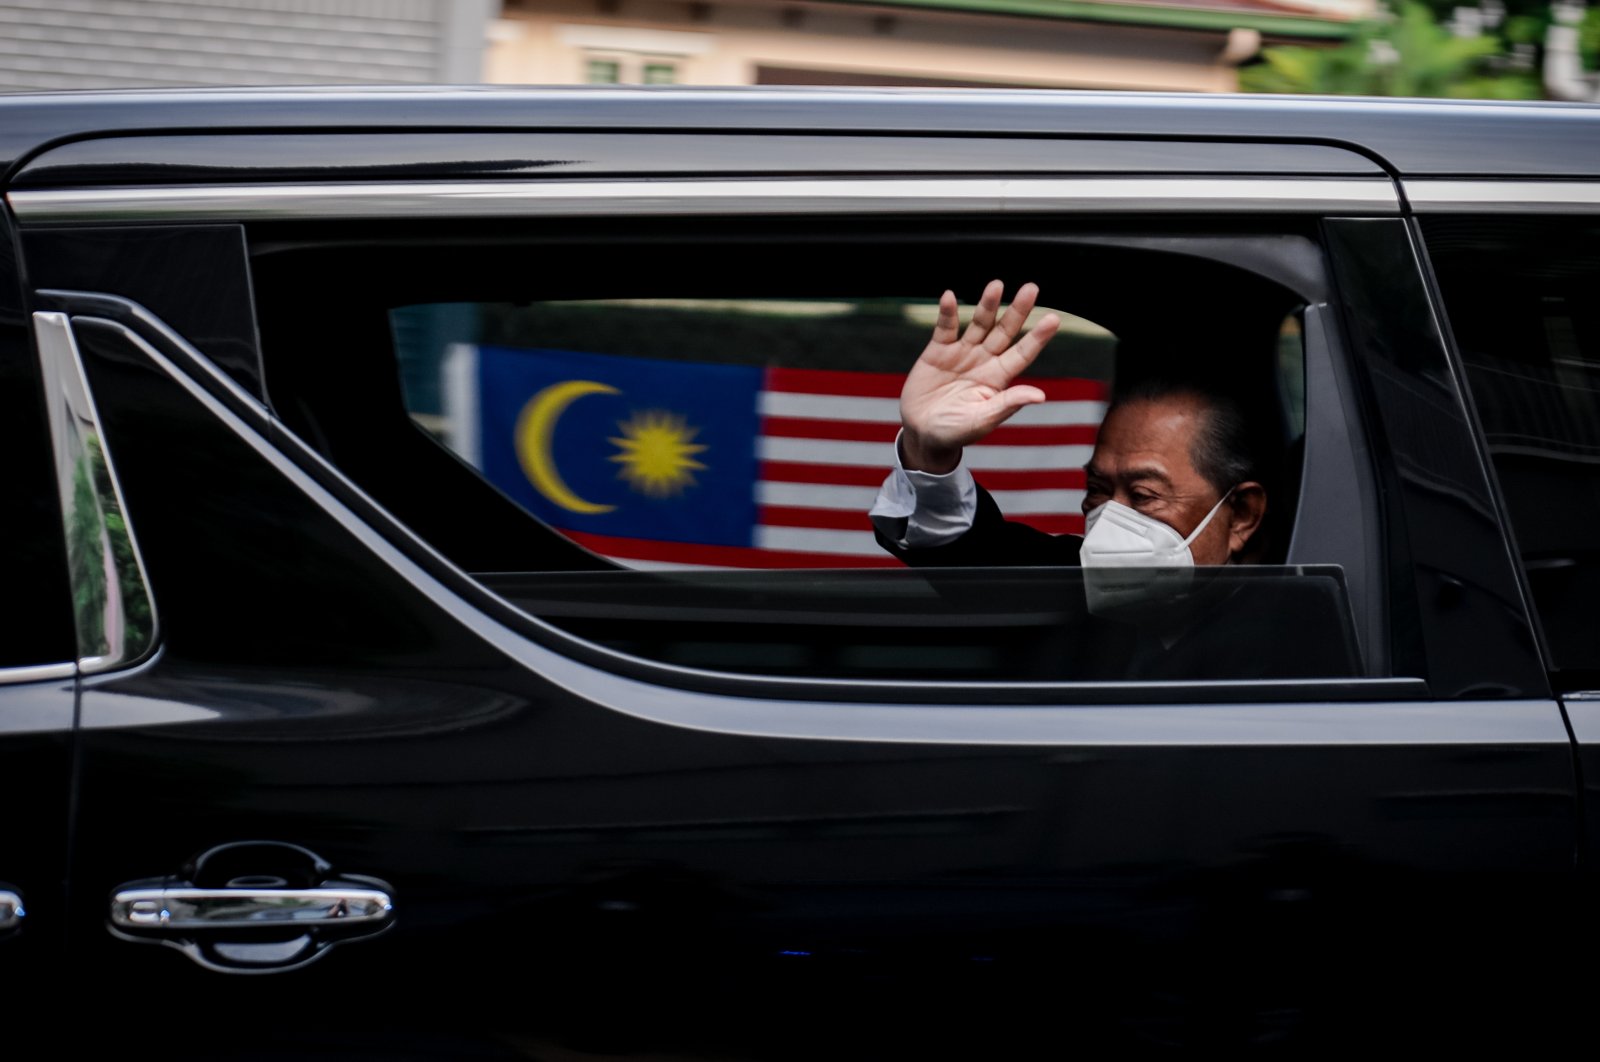 Malaysia's Prime Minister Muhyiddin Yassin waves as he arrives at the National Palace in Kuala Lumpur, Malaysia, on Aug. 16, 2021, as he was expected to quit after just 17 months in office. (AA Photo)